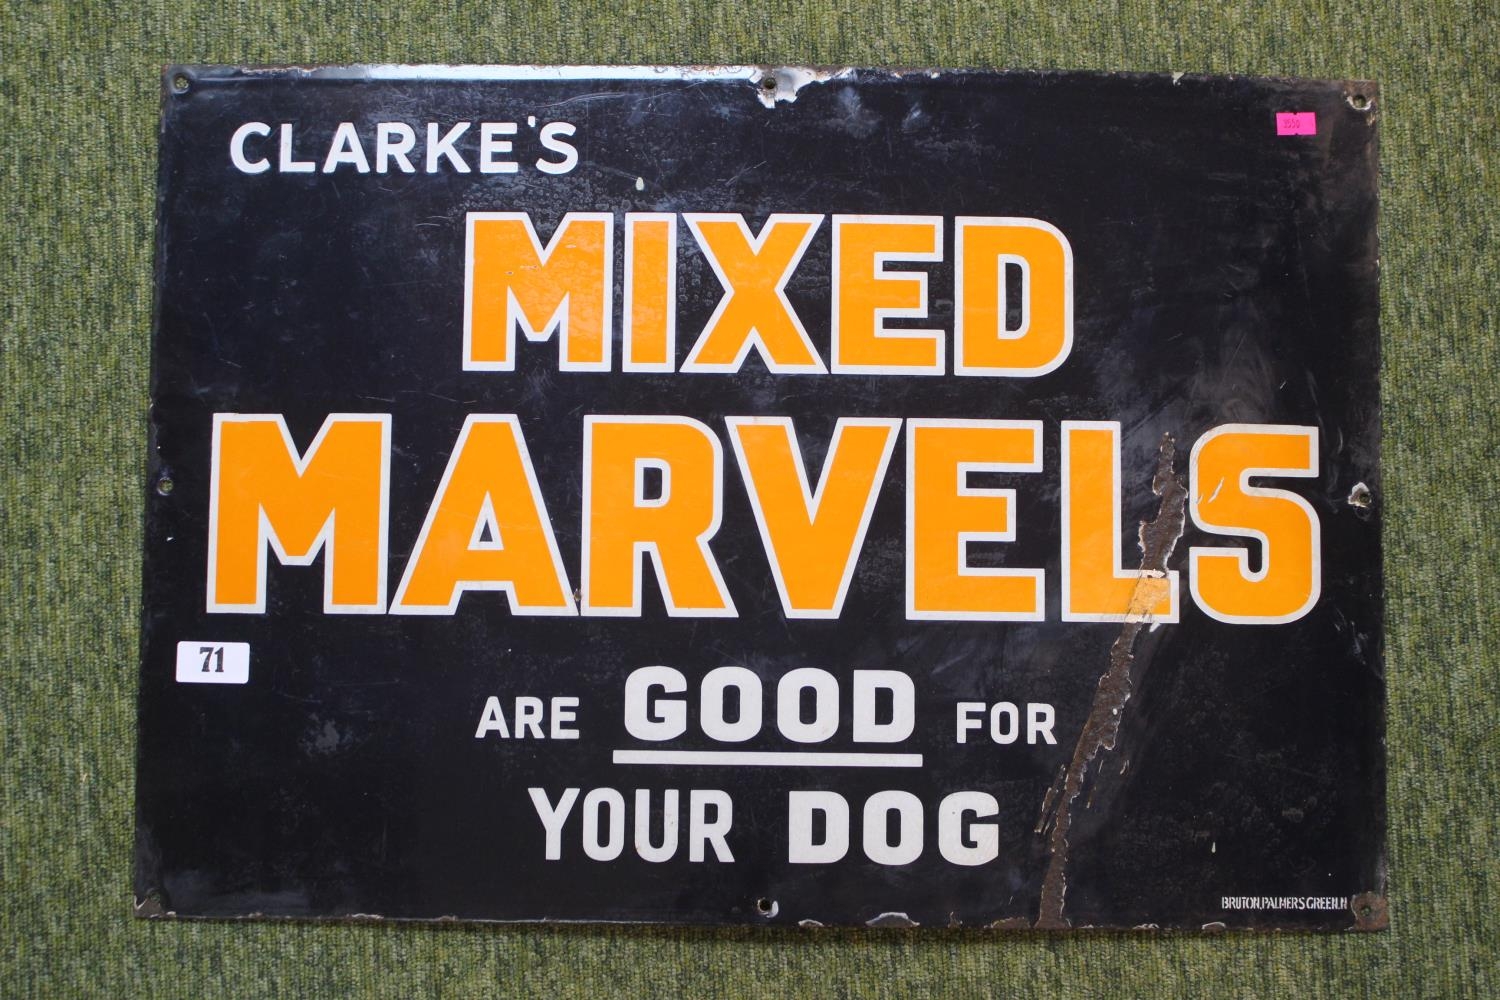 Clarkes Mixed Marvels are good for your Dog - Advertising sign on enamel 66 x 45